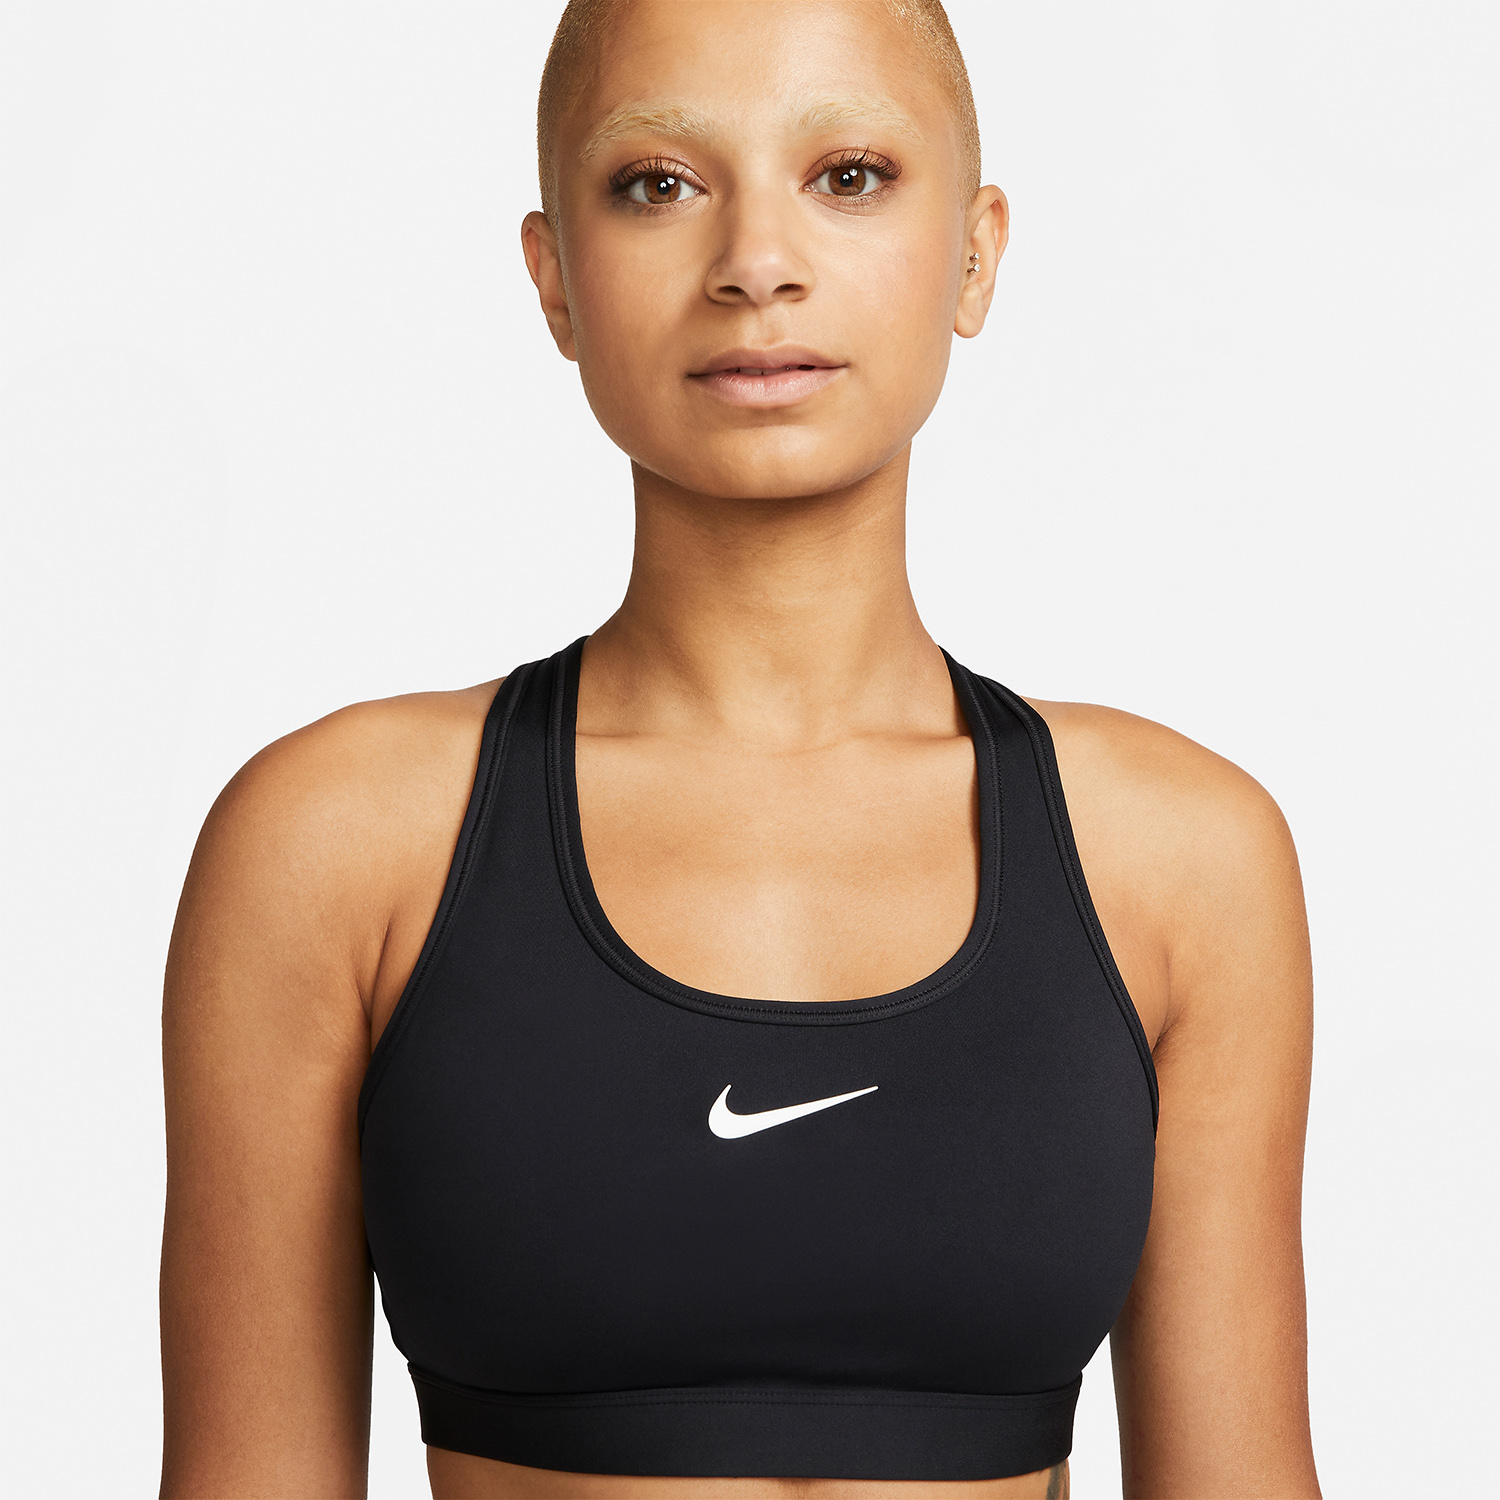 🔽Nike Impact Strappy Printed High Support Sports Bra, size M